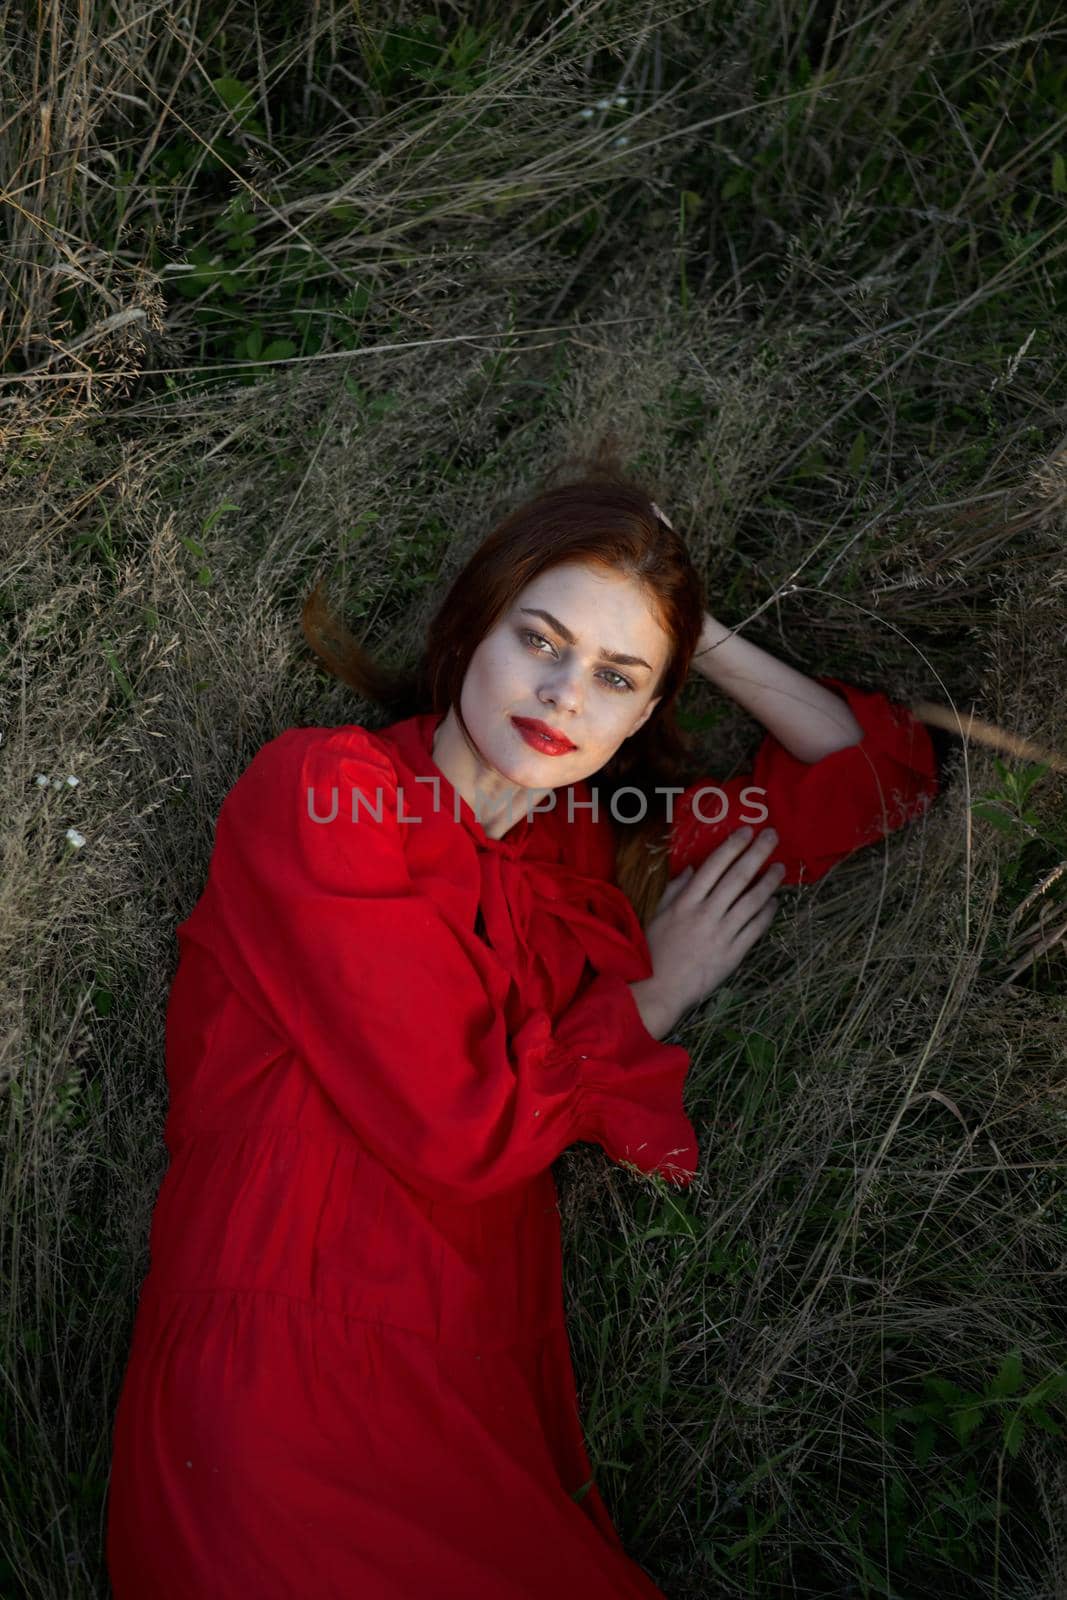 pretty woman in red dress lies on the grass posing top view by Vichizh